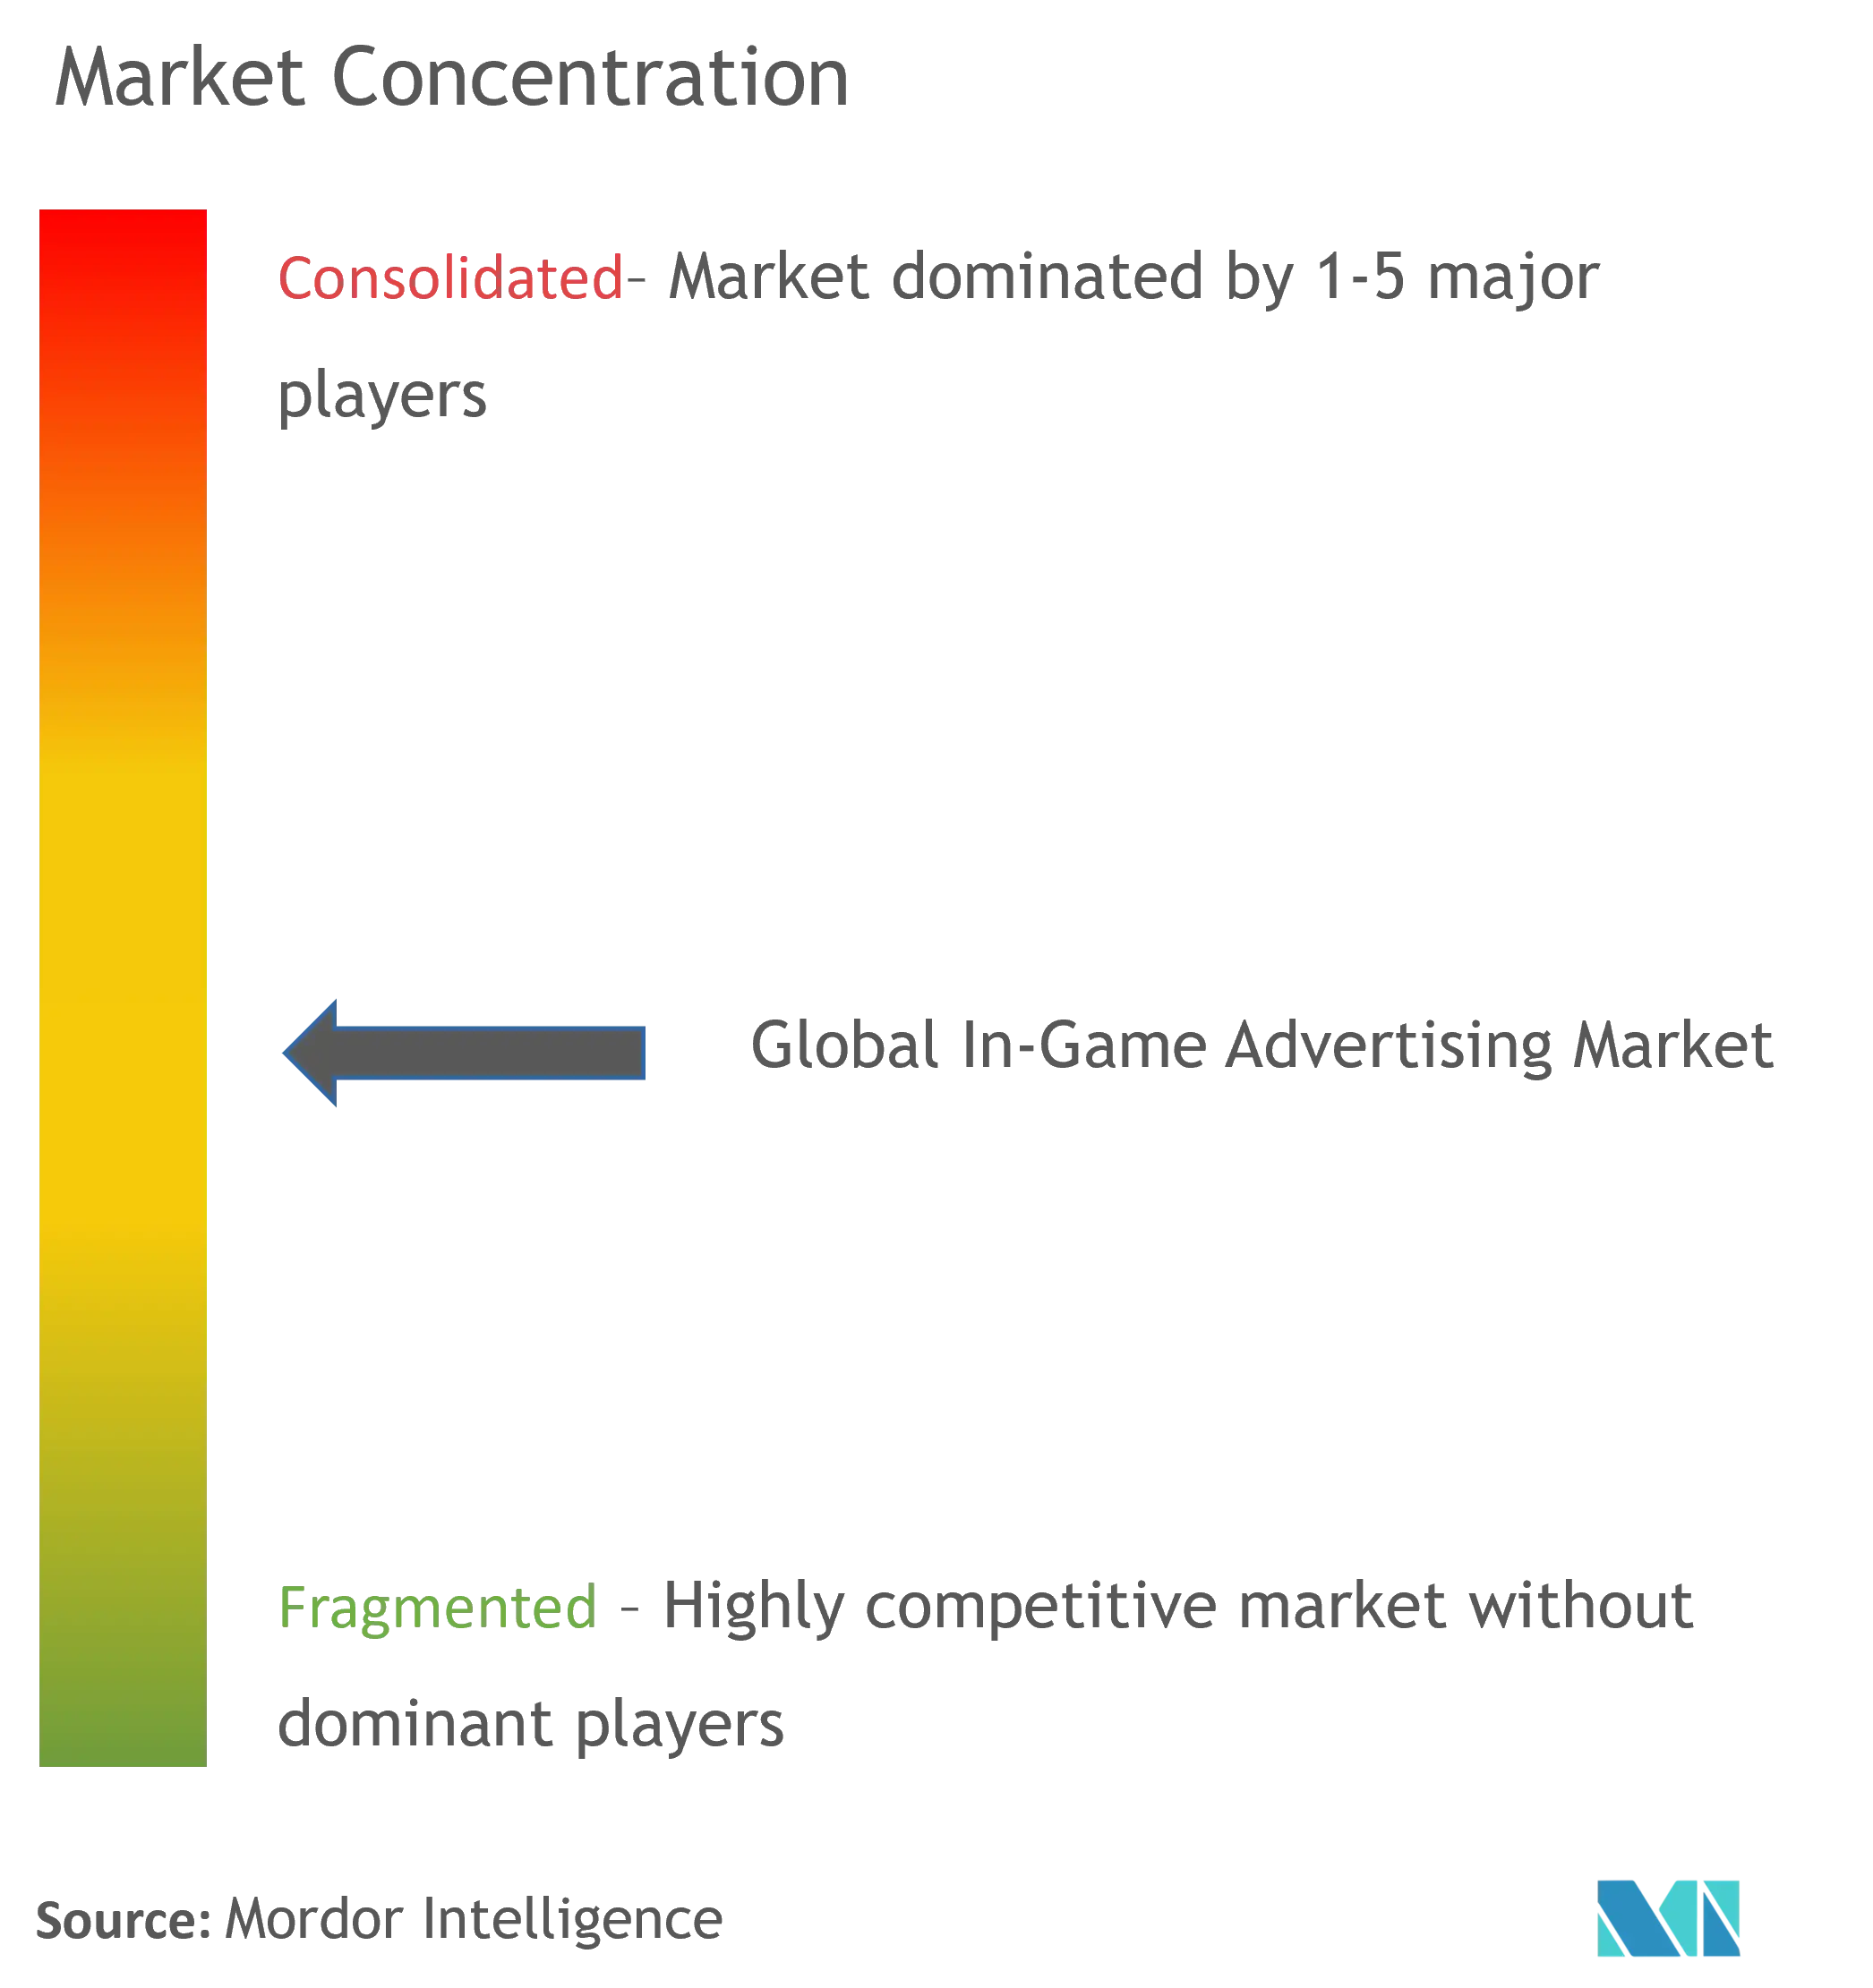 In-game Advertising Market Concentration